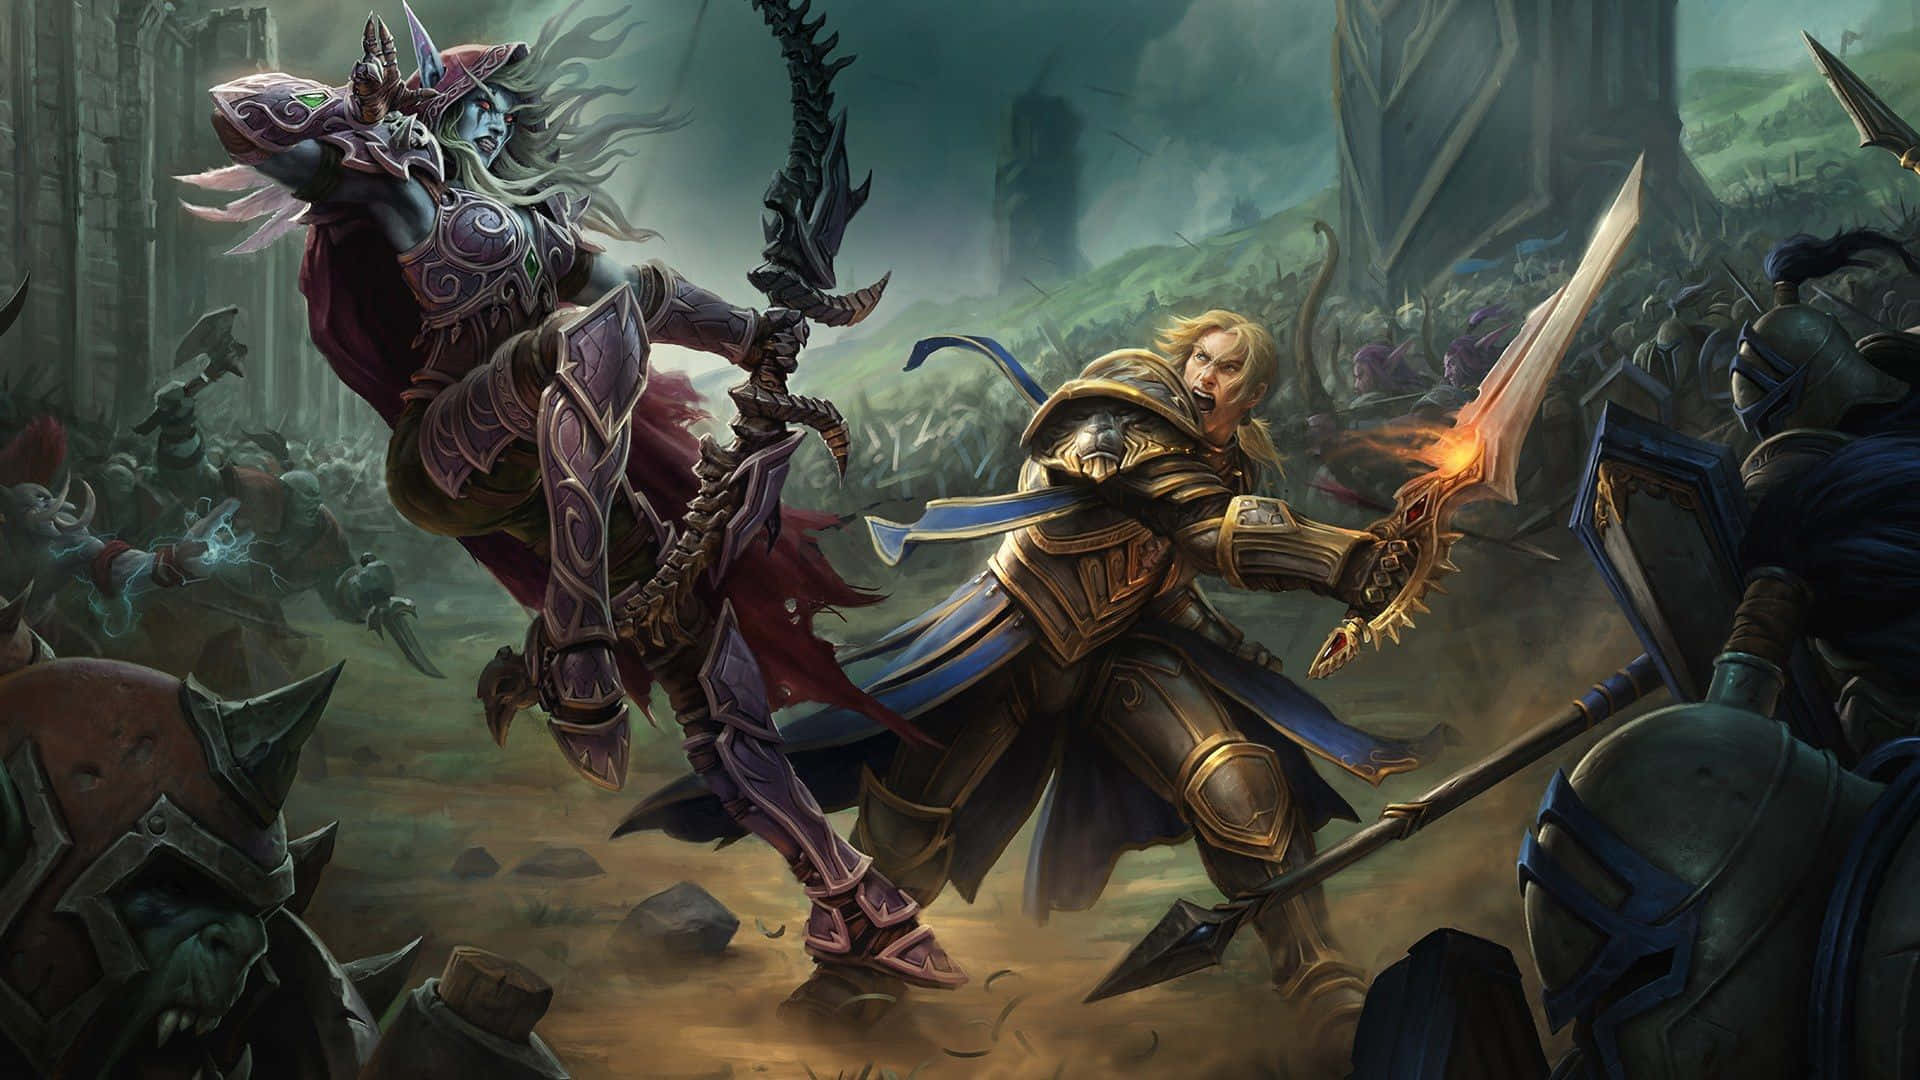 Epic Battle For Azeroth - The Alliance Vs. The Horde In World Of Warcraft Wallpaper